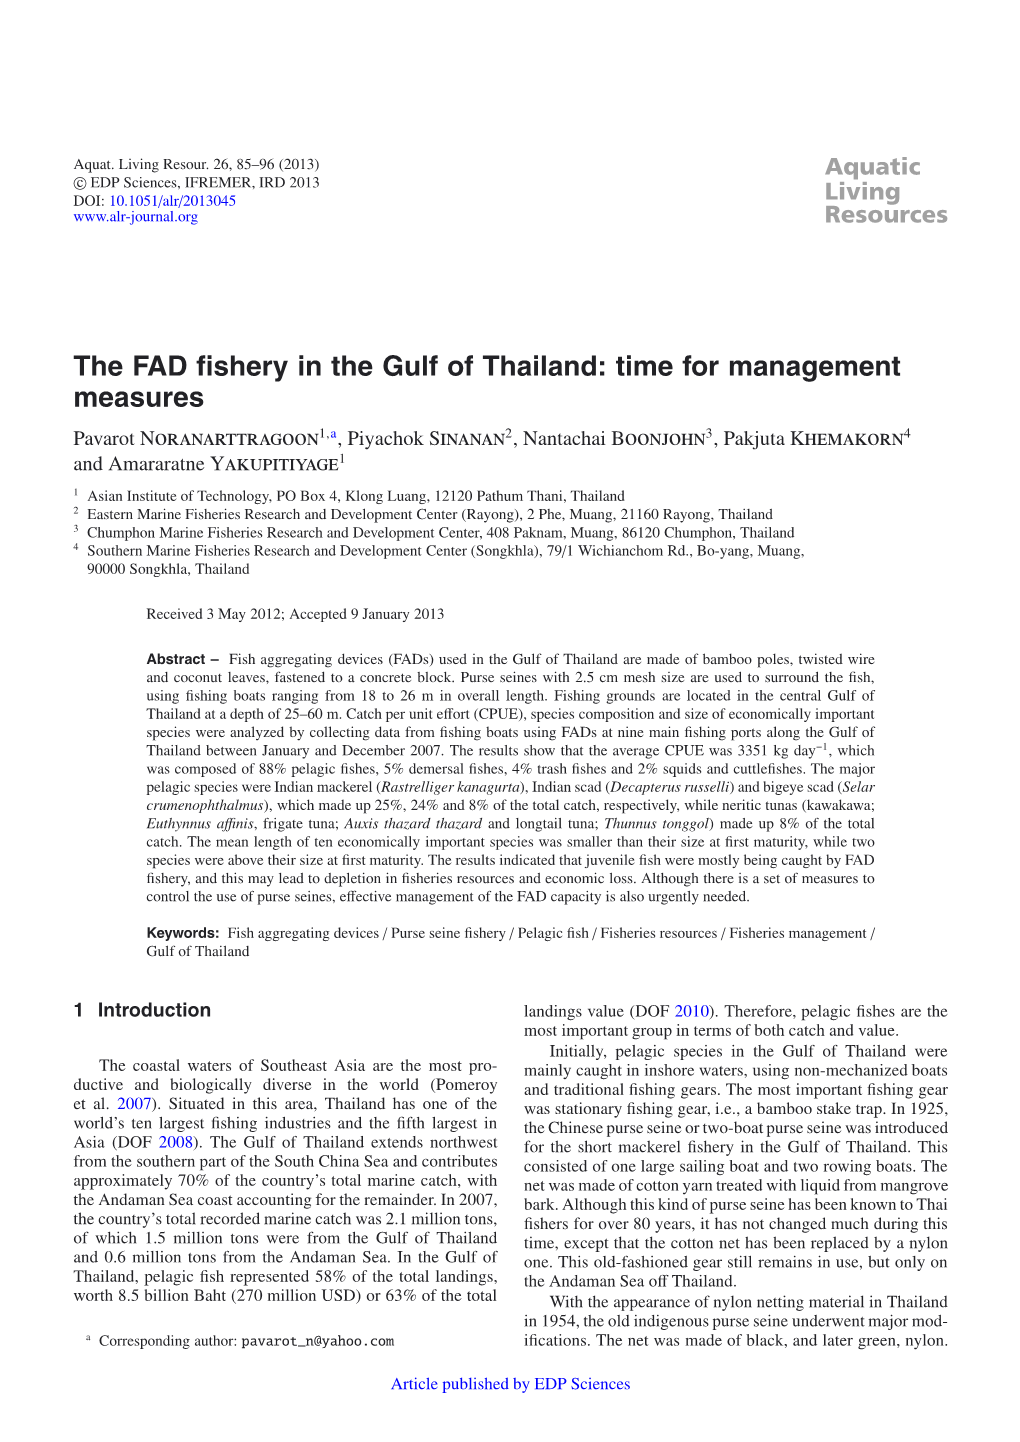 The FAD Fishery in the Gulf of Thailand